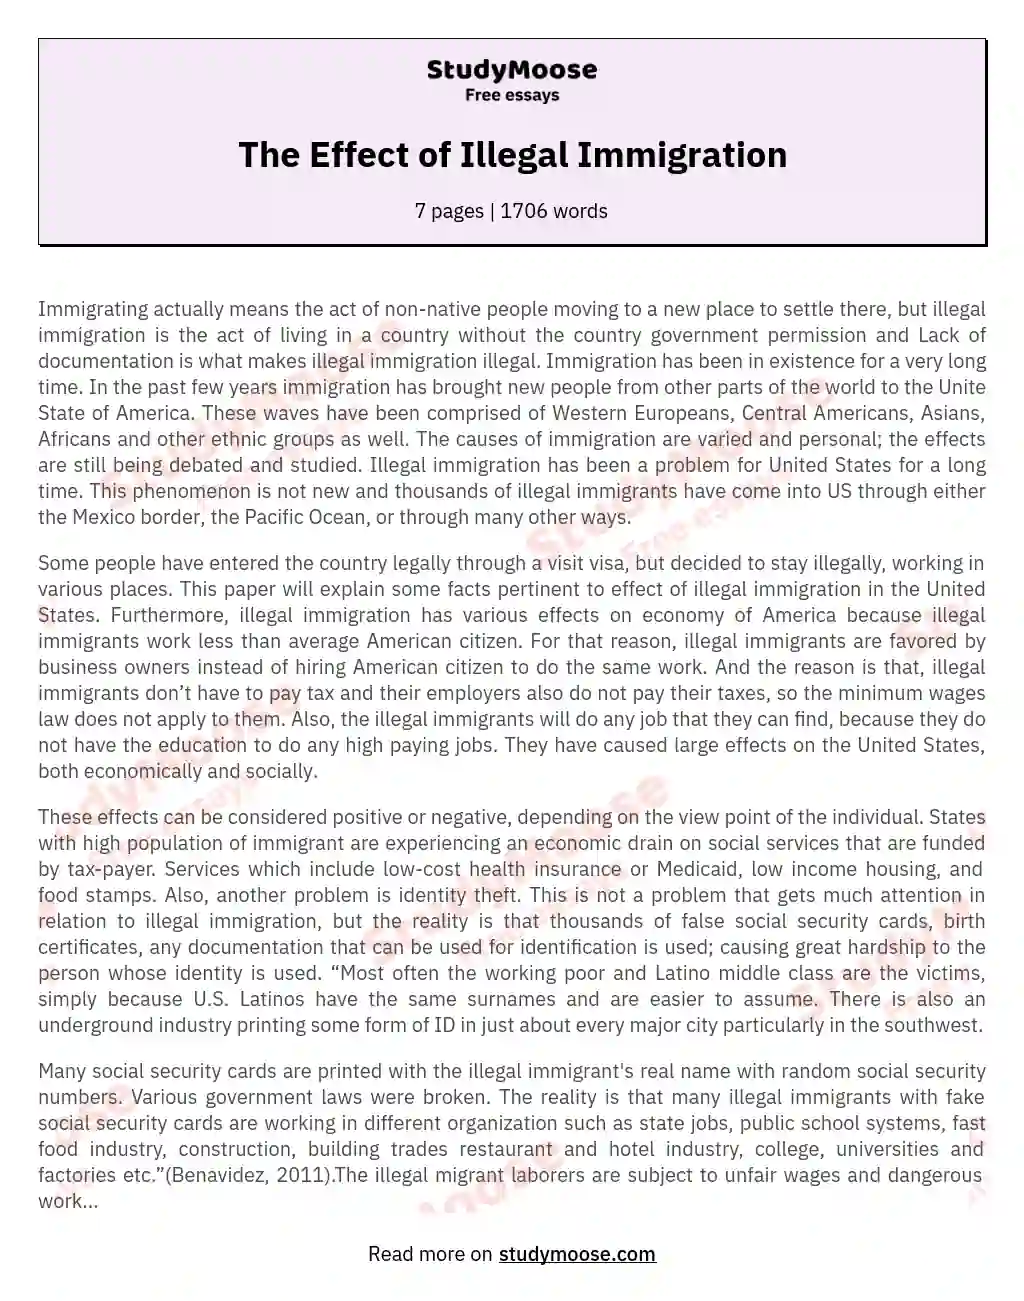 The Effect of Illegal Immigration essay